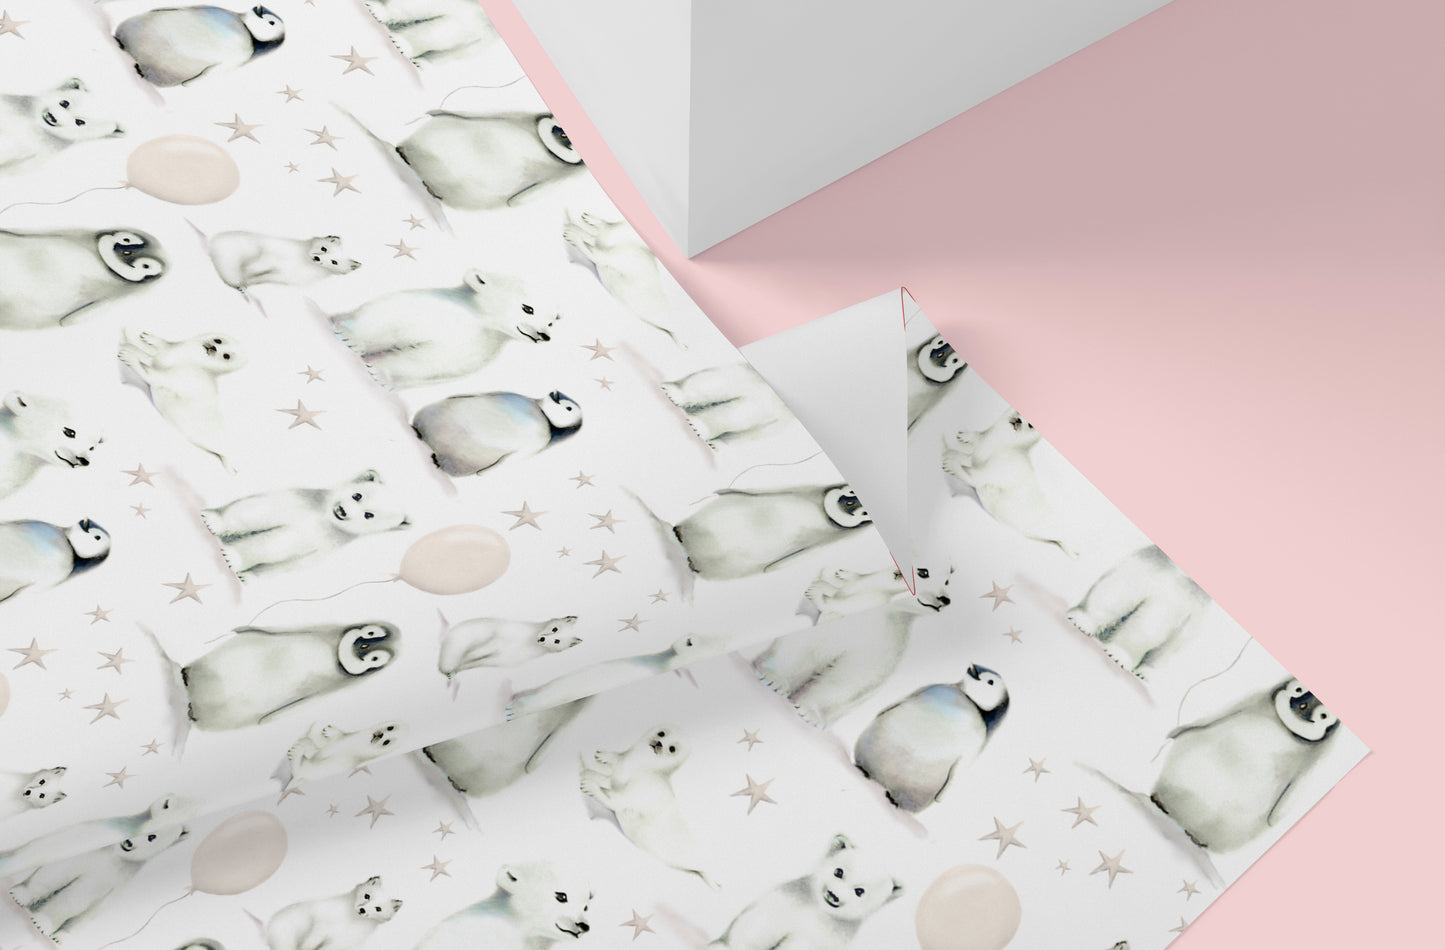 Arctic Friends in Greige Wrapping Paper - 5 Sheets